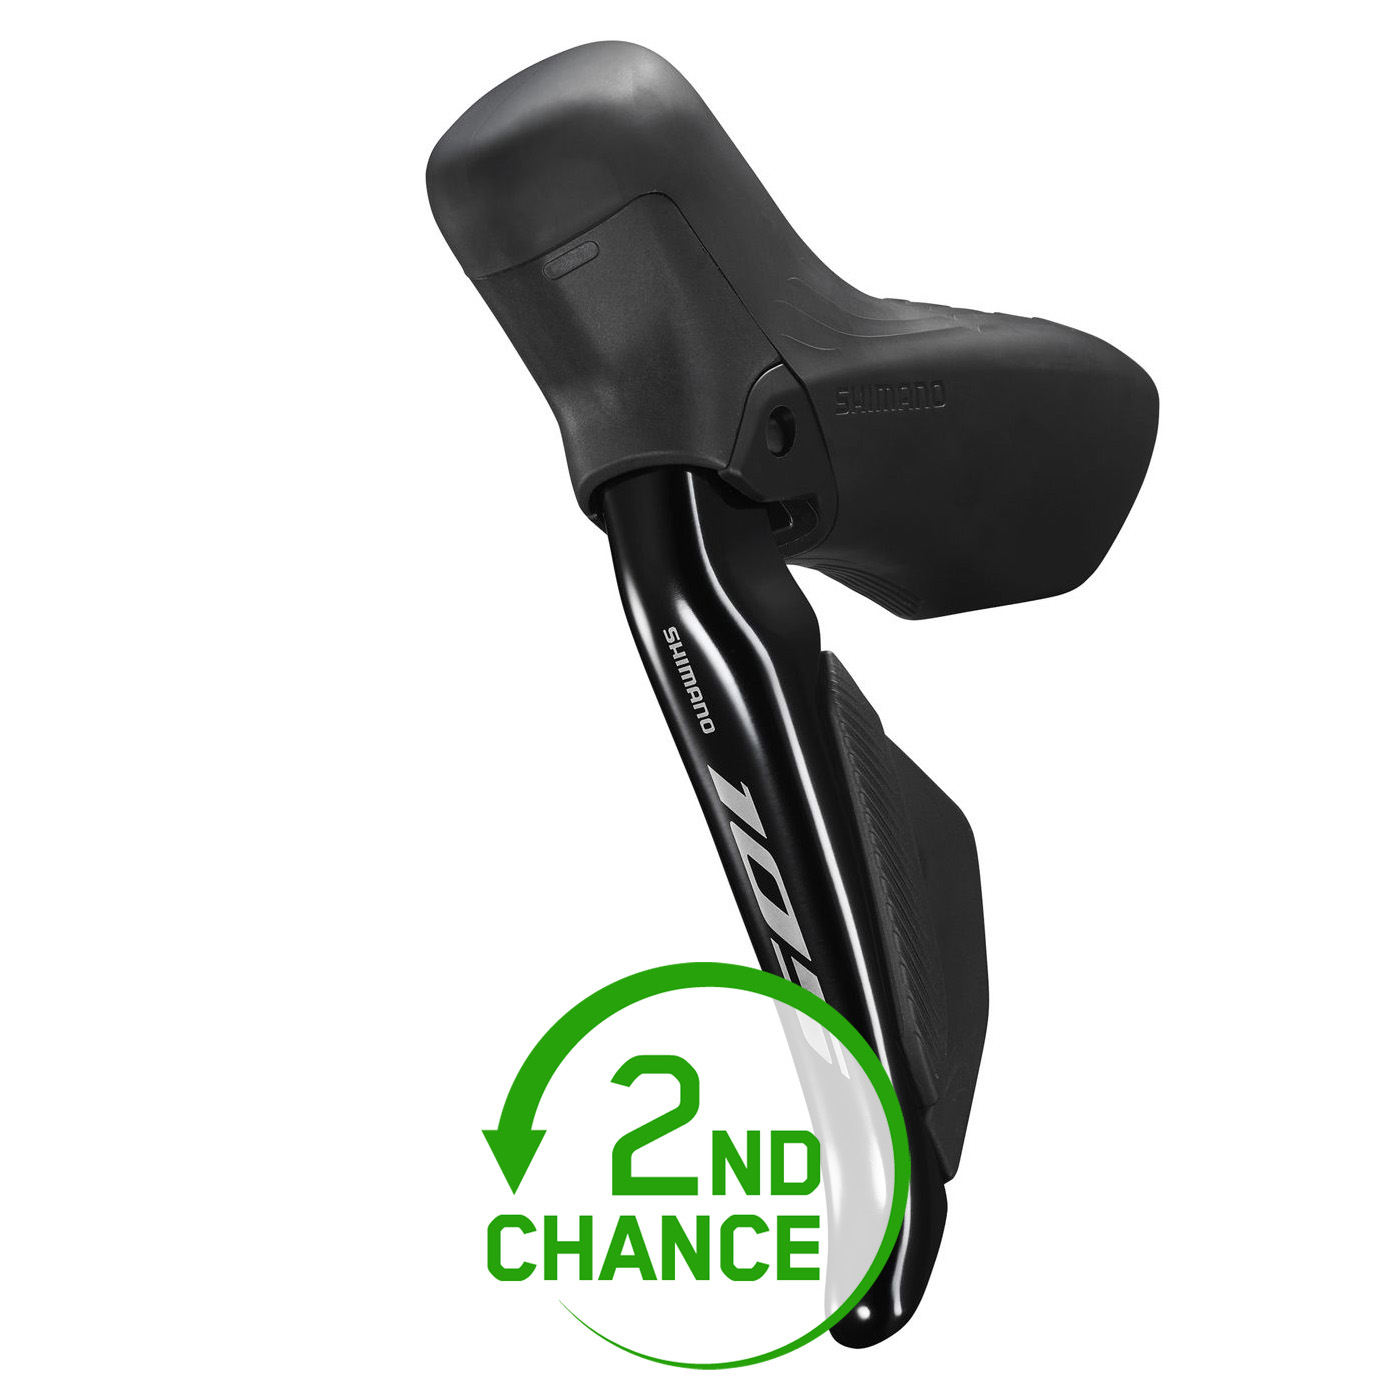 Picture of Shimano 105 ST-R7170 Shift/Brake Lever - Di2 | 2x12-speed - STI | Hydraulic - left - 2nd Choice